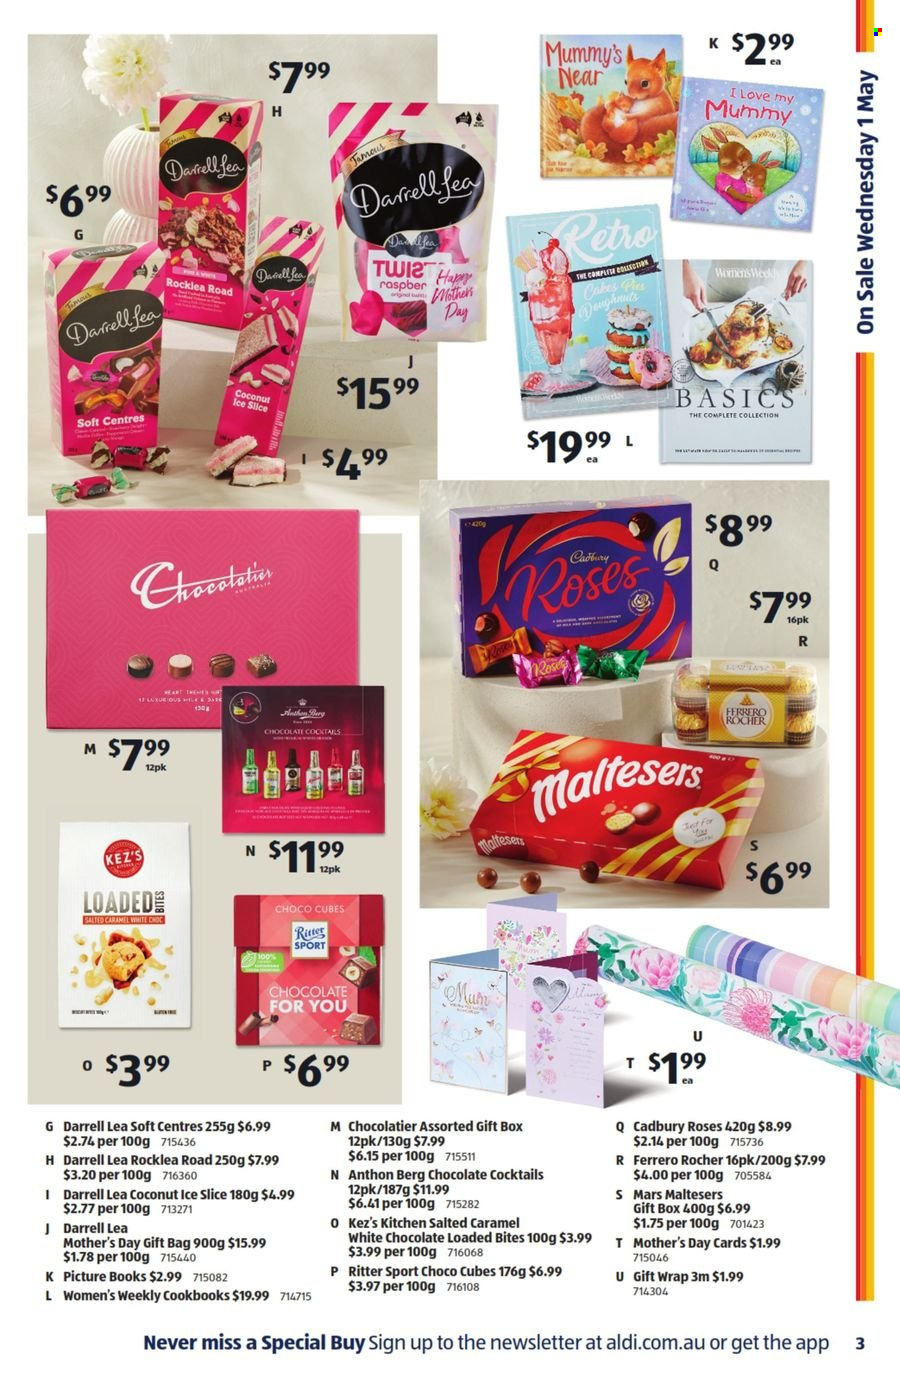 thumbnail - ALDI Catalogue - 1 May 2024 - 7 May 2024 - Sales products - donut, white chocolate, pralines, chocolate, Ferrero Rocher, Mars, gift box, Maltesers, Cadbury, Cadbury Roses, Ritter Sport, chocolate candies, cocktail, Jet, gift wrap, gift bag, book, children's book, cookbook. Page 3.